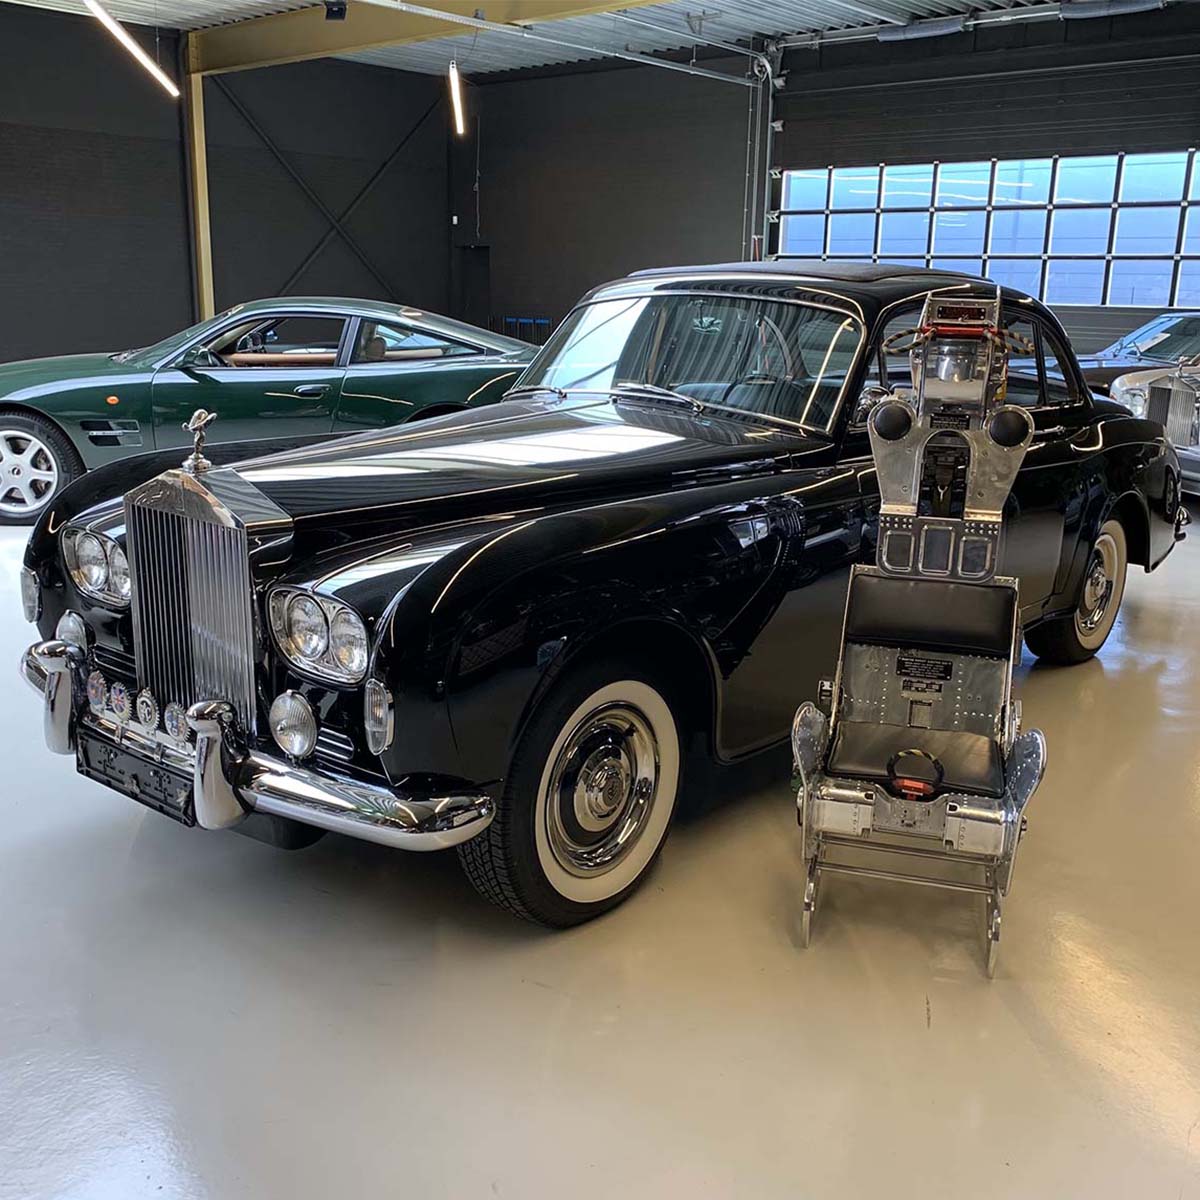 Polished Martin-Baker ejection seat next to a Rolls-Royce and an Aston Martin.